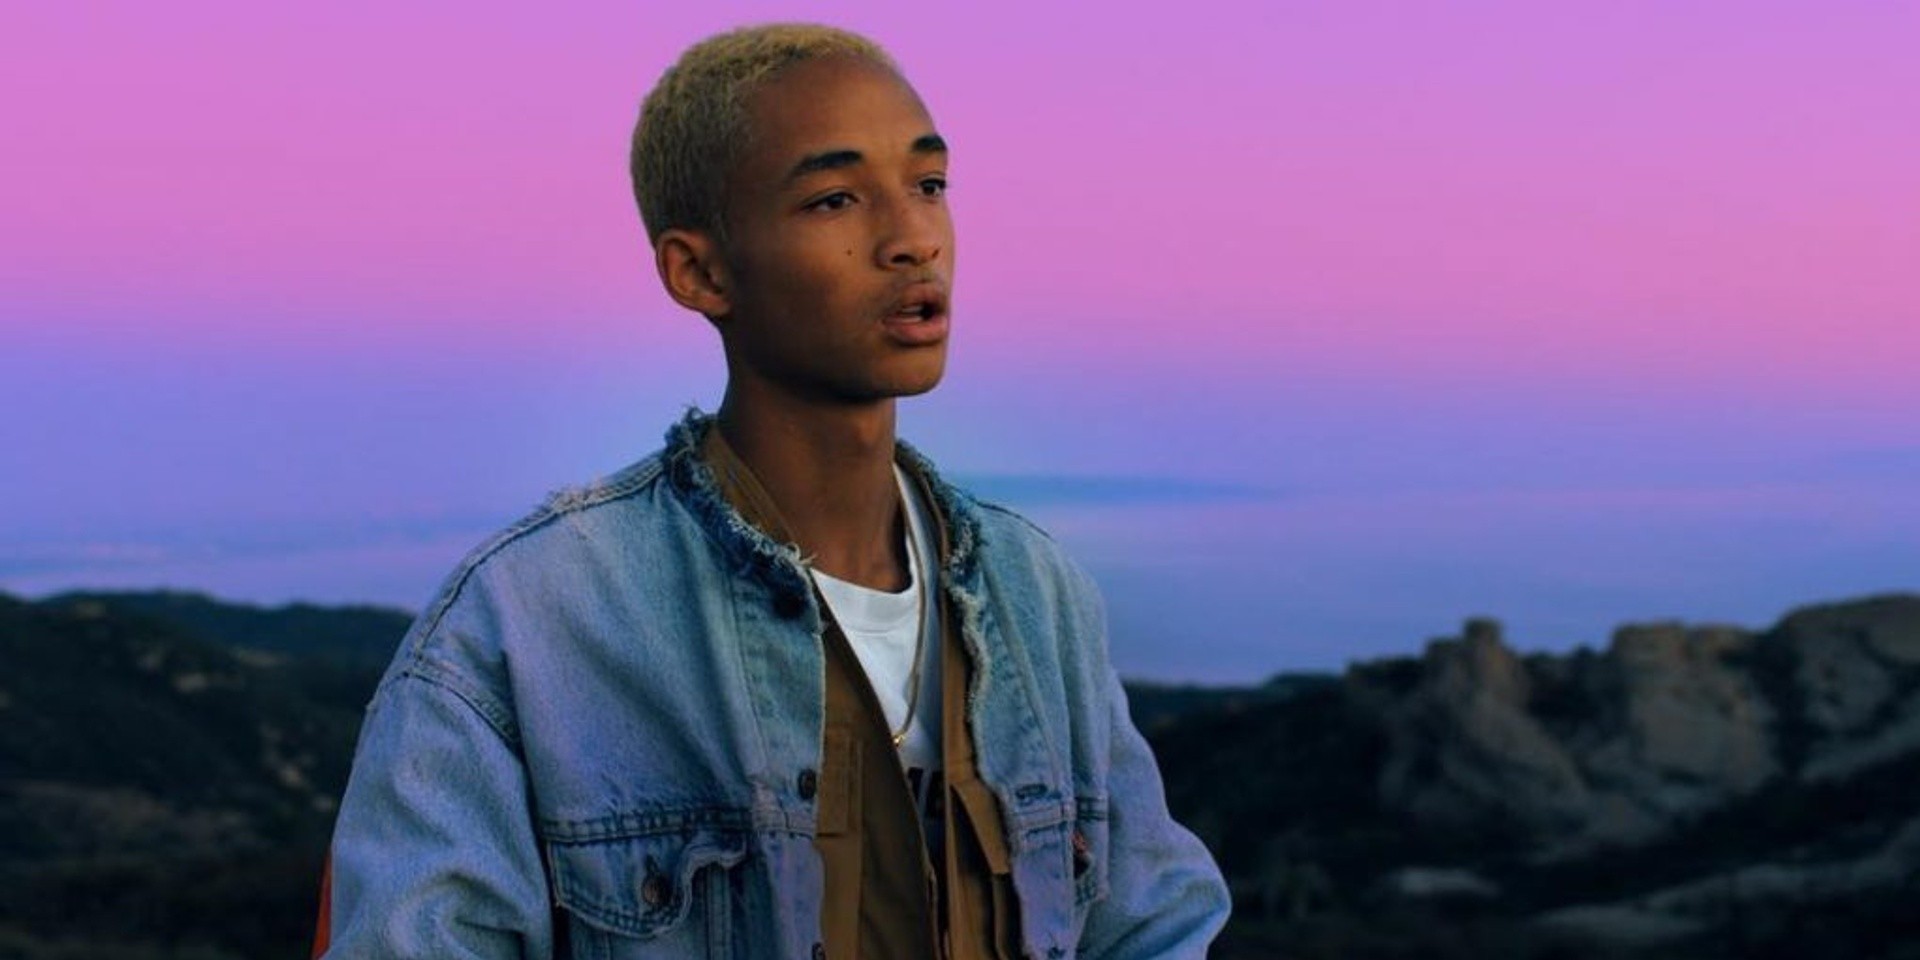 Jaden Smith is coming to Manila